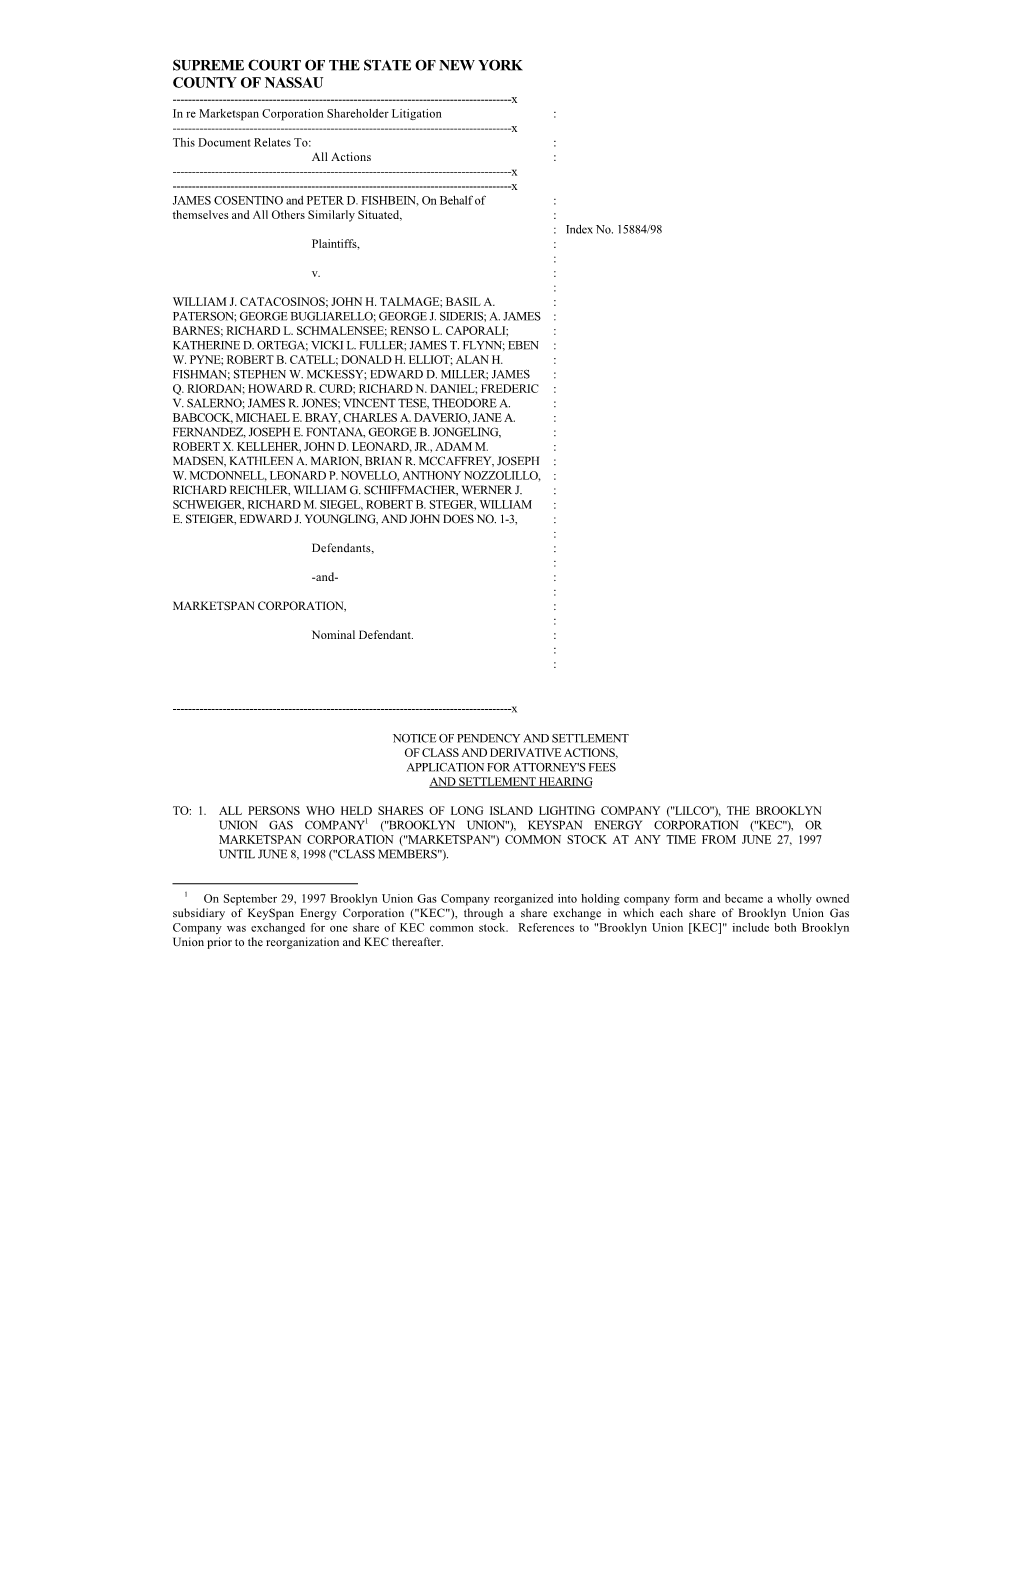 In Re: Marketspan Corporation Securities Litigation 15884/98-Notice of Pendency and Settlement of Class and Derivative Actions